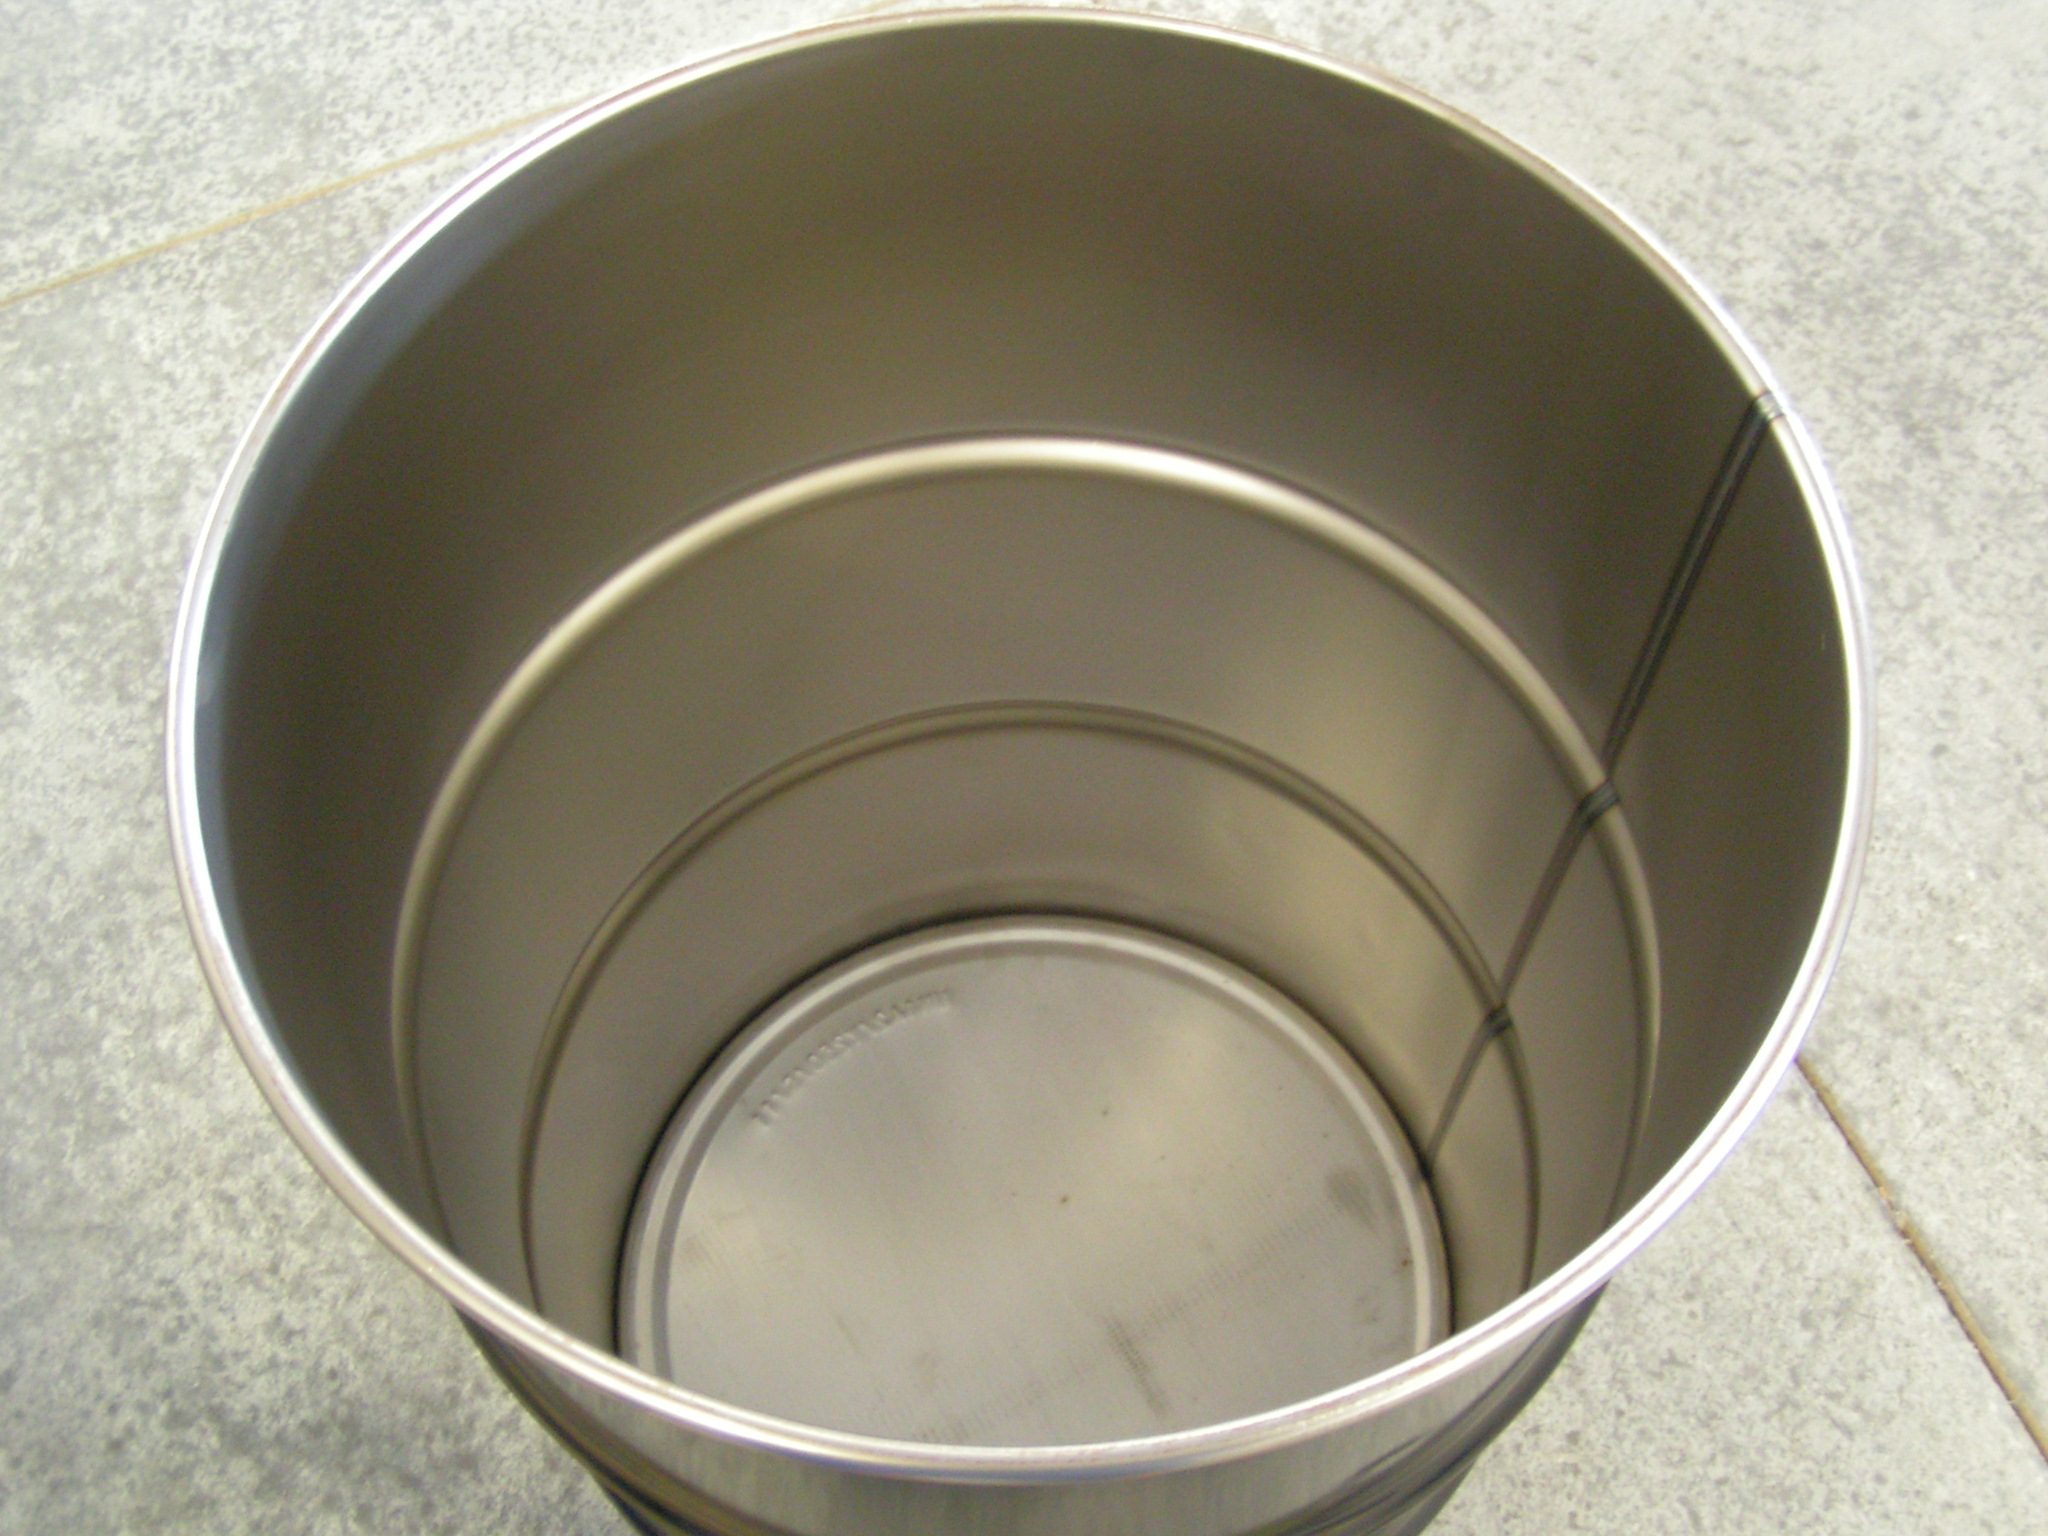 New Steel Drums 55 gallon steel open head drums available $69.00 with  interior lined and unlined, bolt band and lever locking bands are also  available. Factory seconds with paint flaws are also